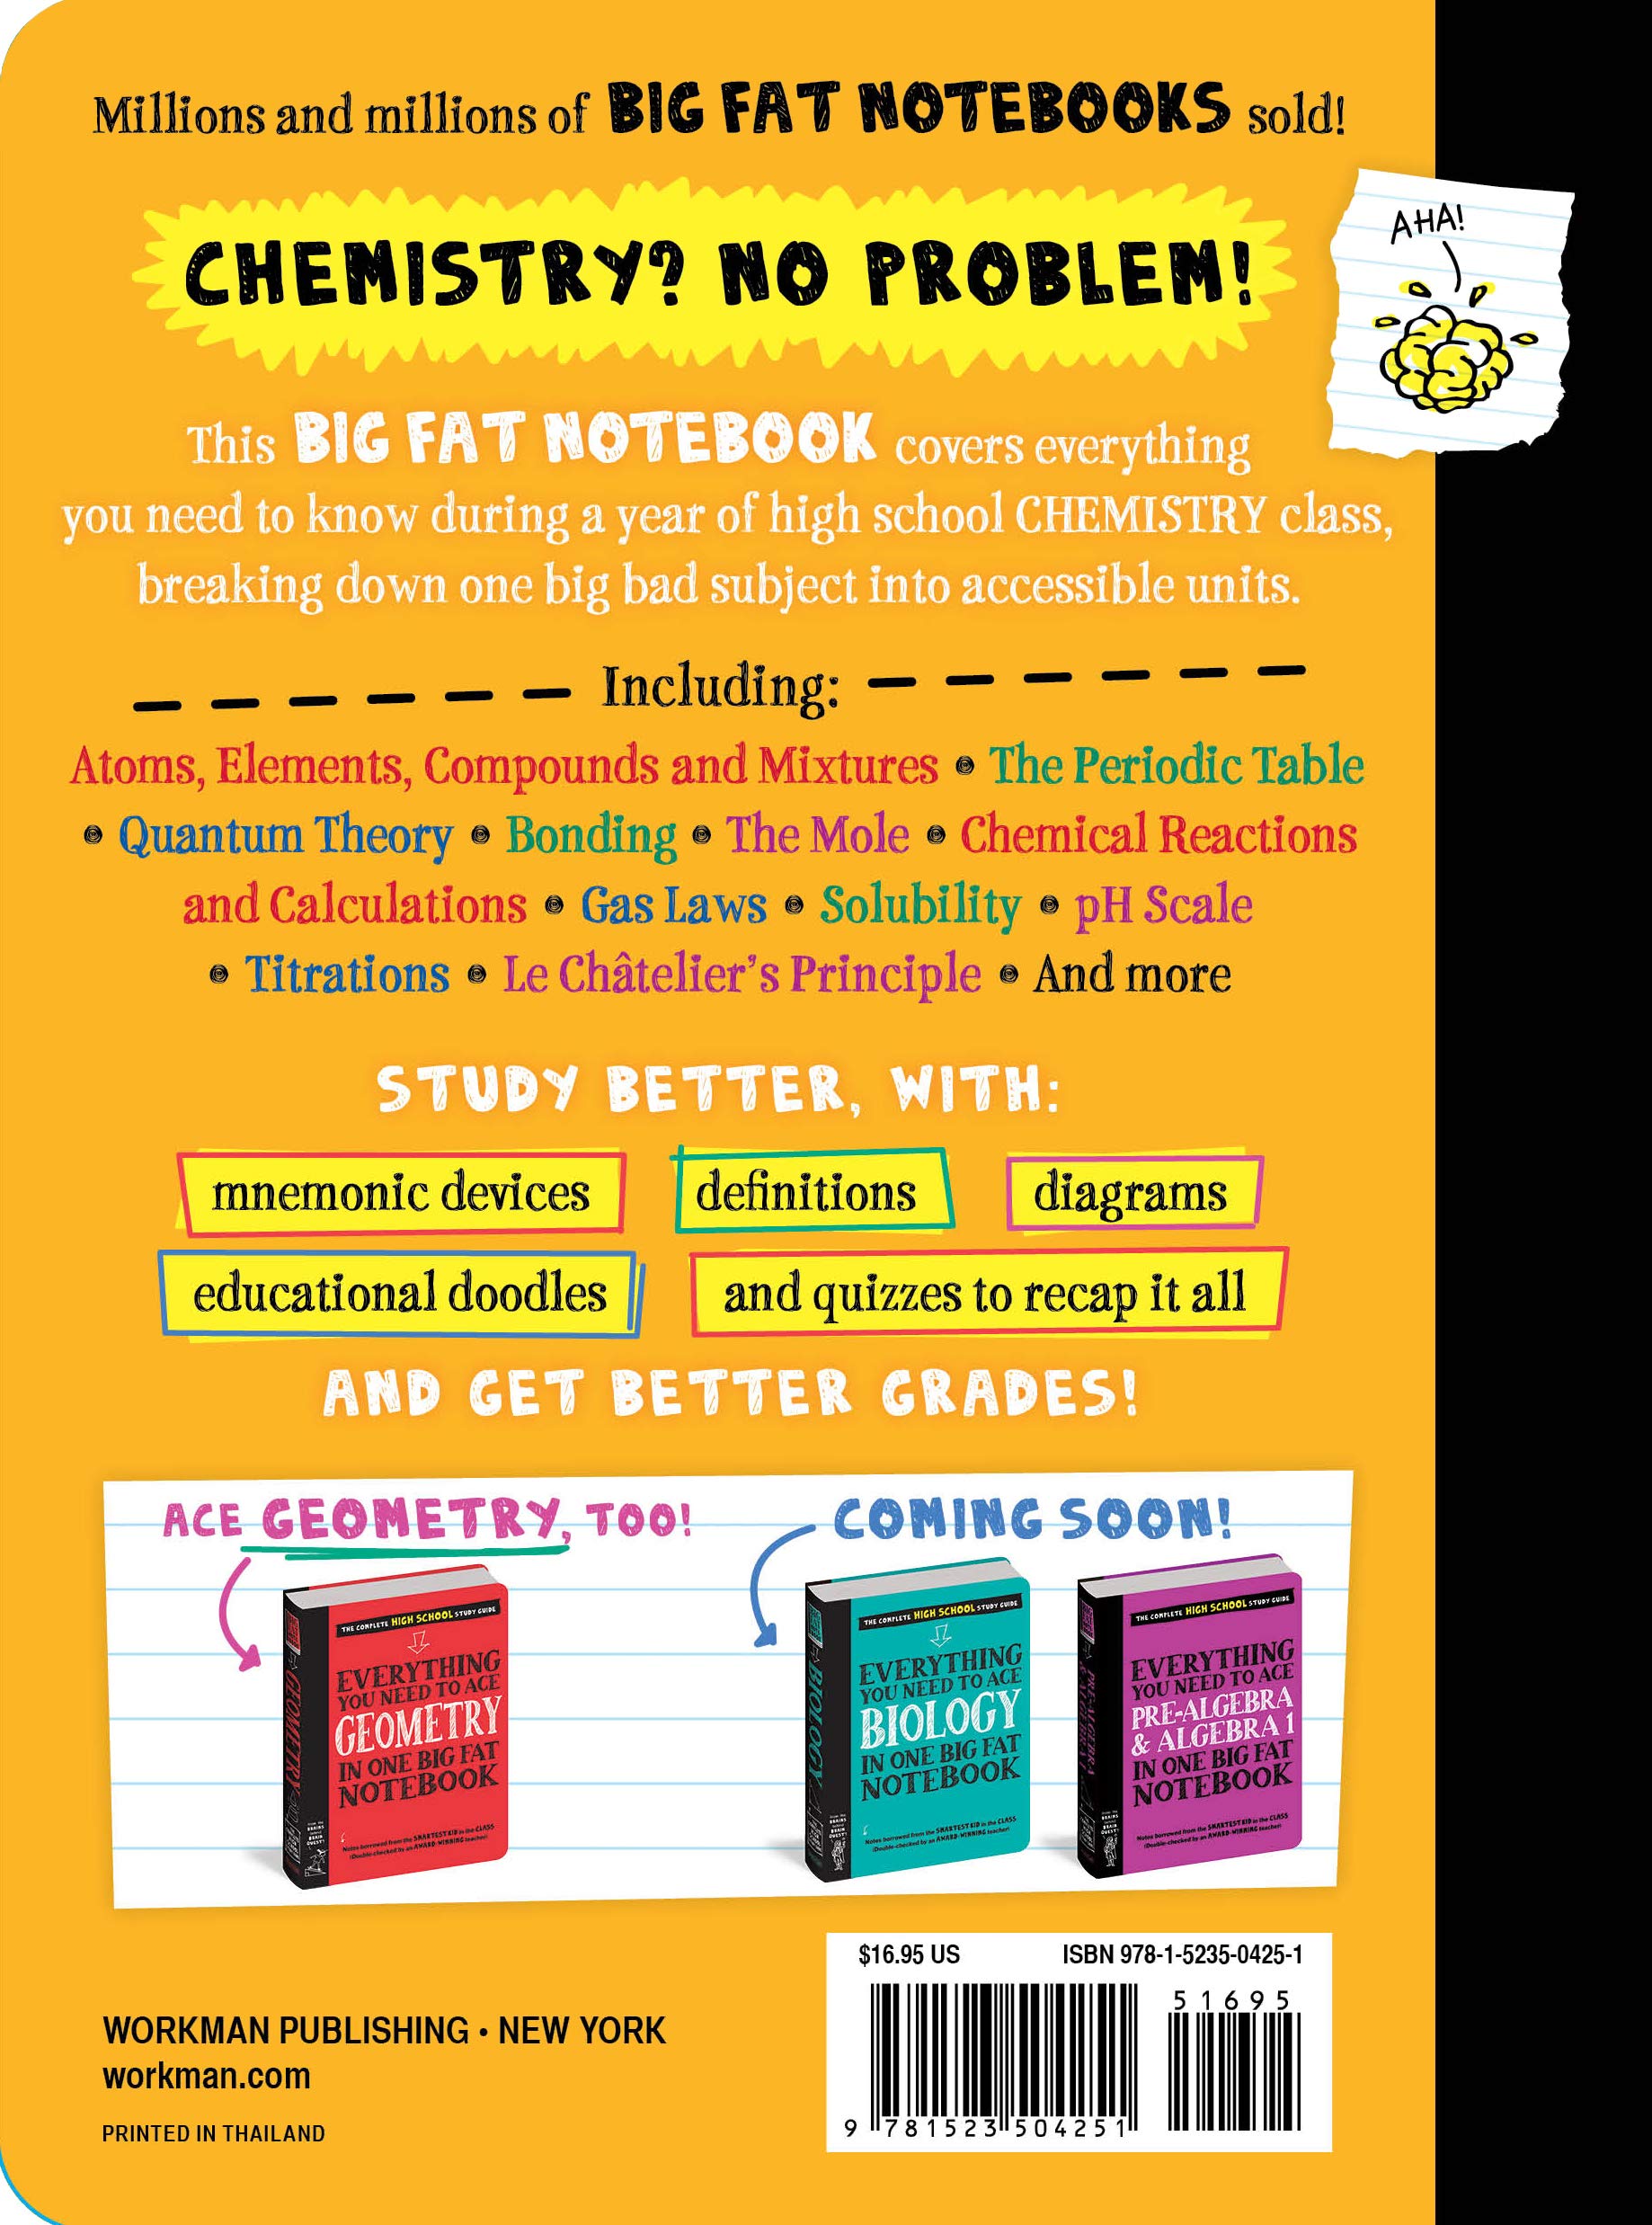 Everything You Need to Ace Chemistry in One Big Fat Notebook - The English Bookshop Kuwait